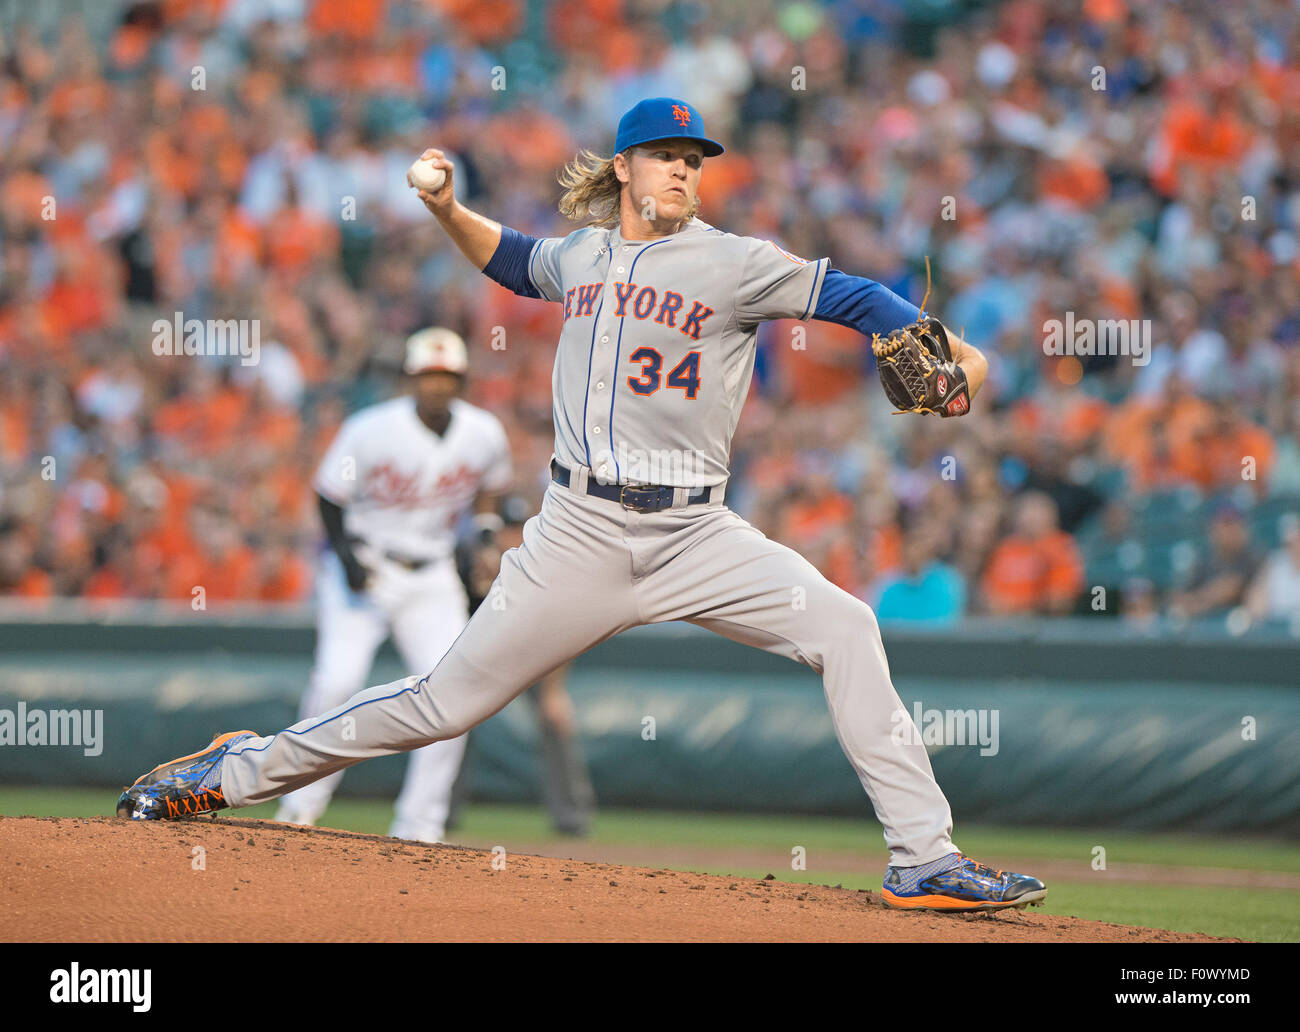 New York Mets starting pitcher Noah Syndergaard (34) works in the first inning against the Baltimore Orioles at Oriole Park at Camden Yards in Baltimore, Maryland on Wednesday, August 19, 2015. The Orioles won the game 5 - 4. Credit: Ron Sachs/CNP (RESTRICTION: NO New York or New Jersey Newspapers or newspapers within a 75 mile radius of New York City) - NO WIRE SERVICE - Stock Photo